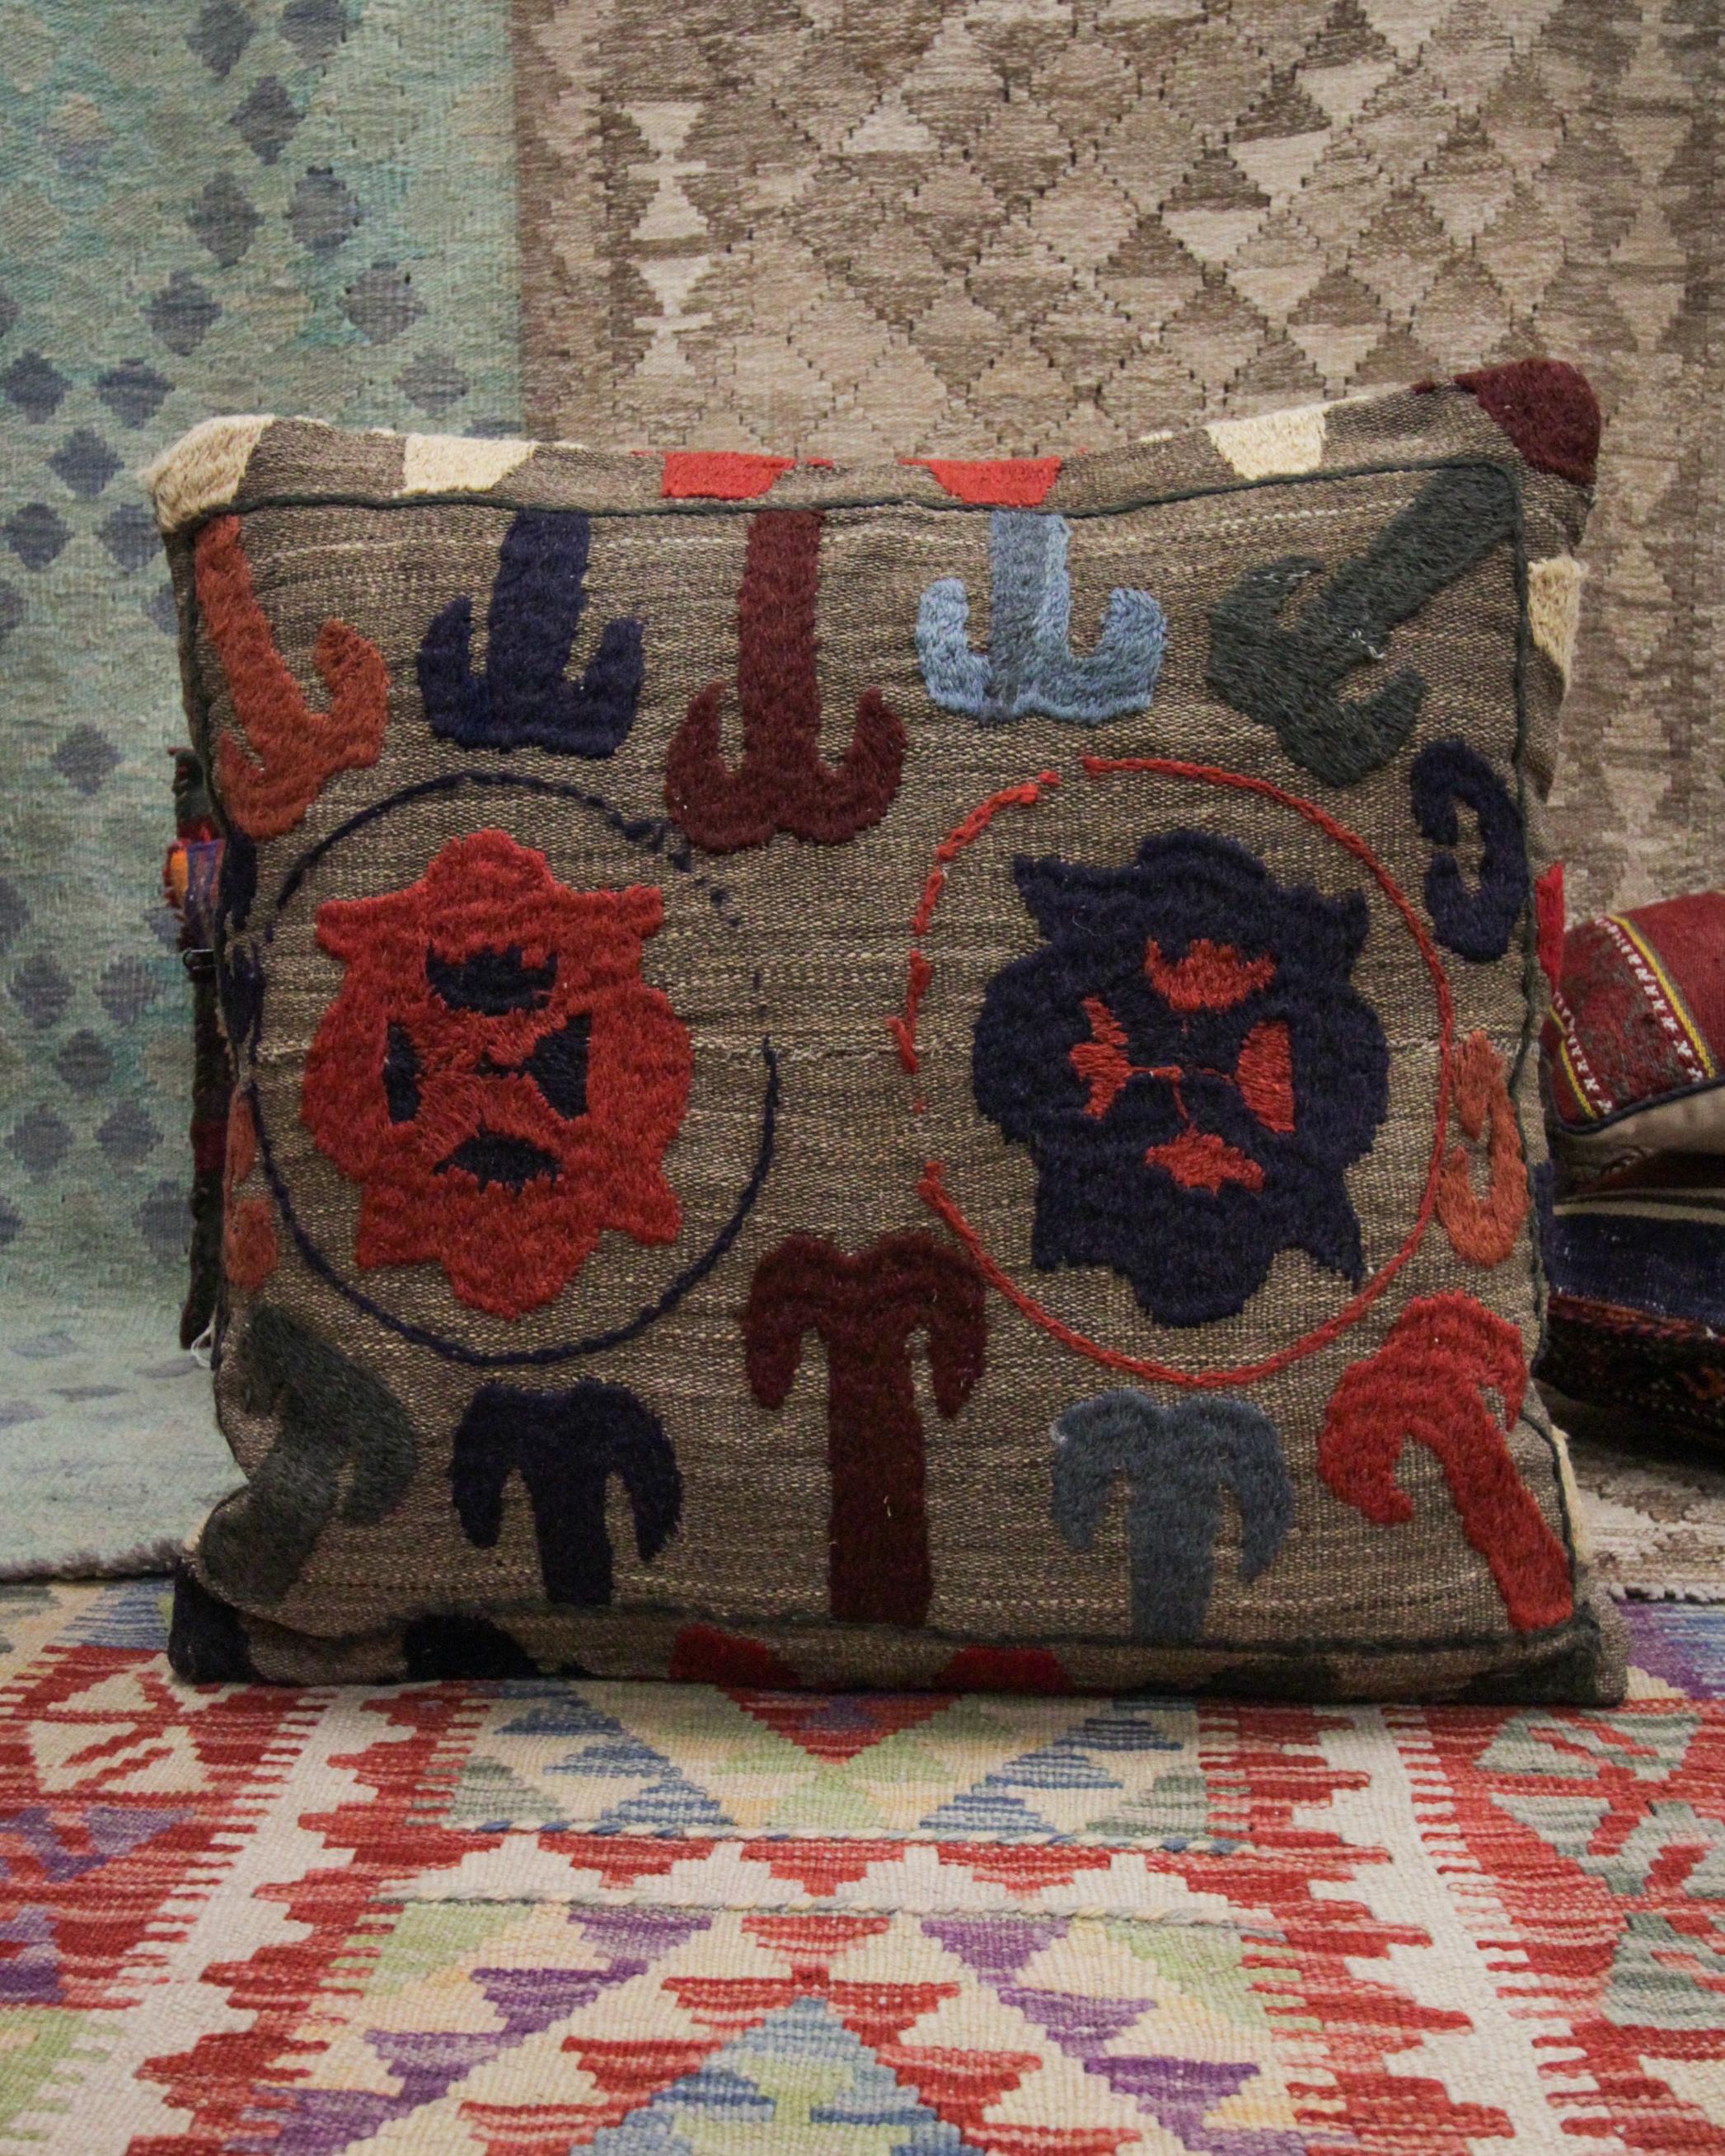 Hand-Woven Wool Scatter Cushion Uzbek Tribal Pillow Cover Handmade Large Brown Suzani For Sale